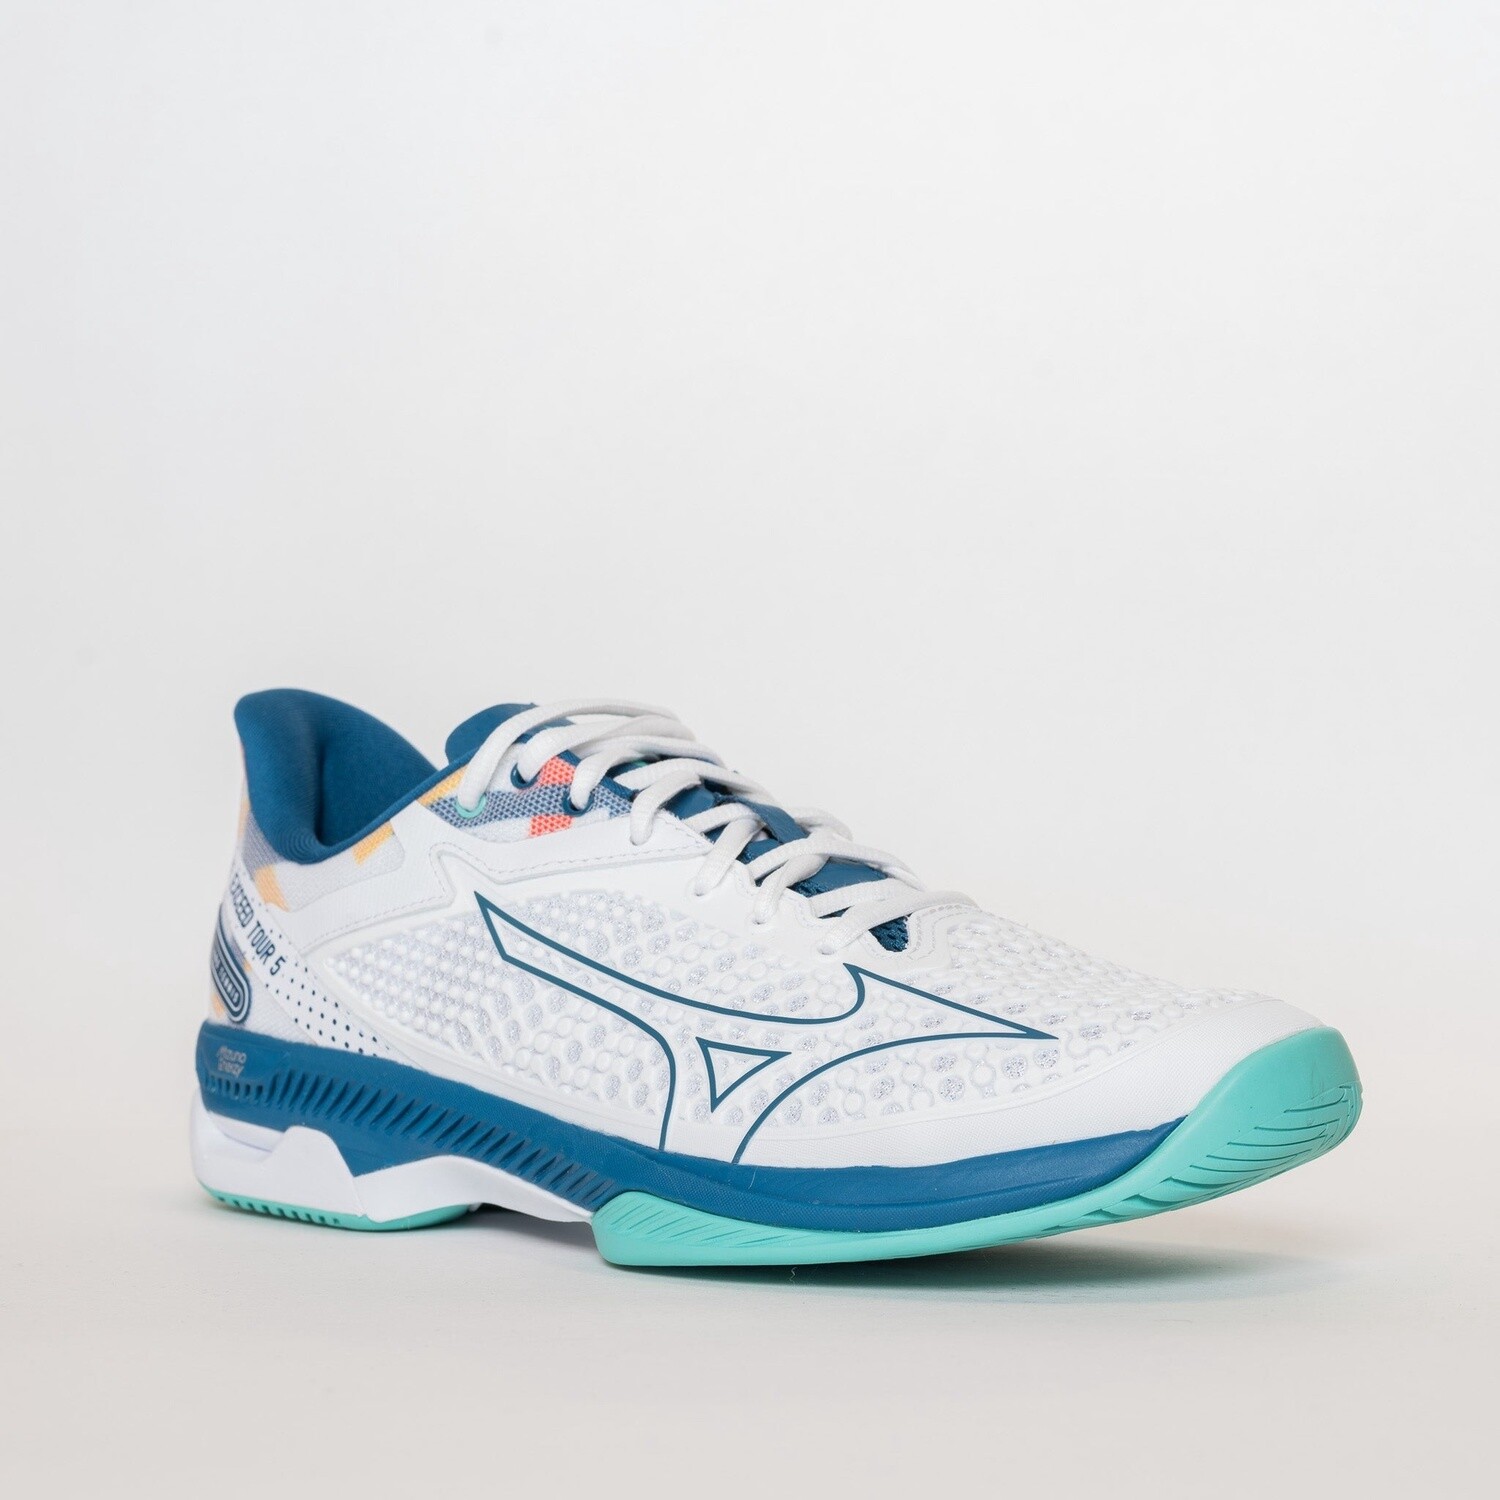 Wave Exceed Tour 5 AC White/Moroccan Blue, Size: 7.5